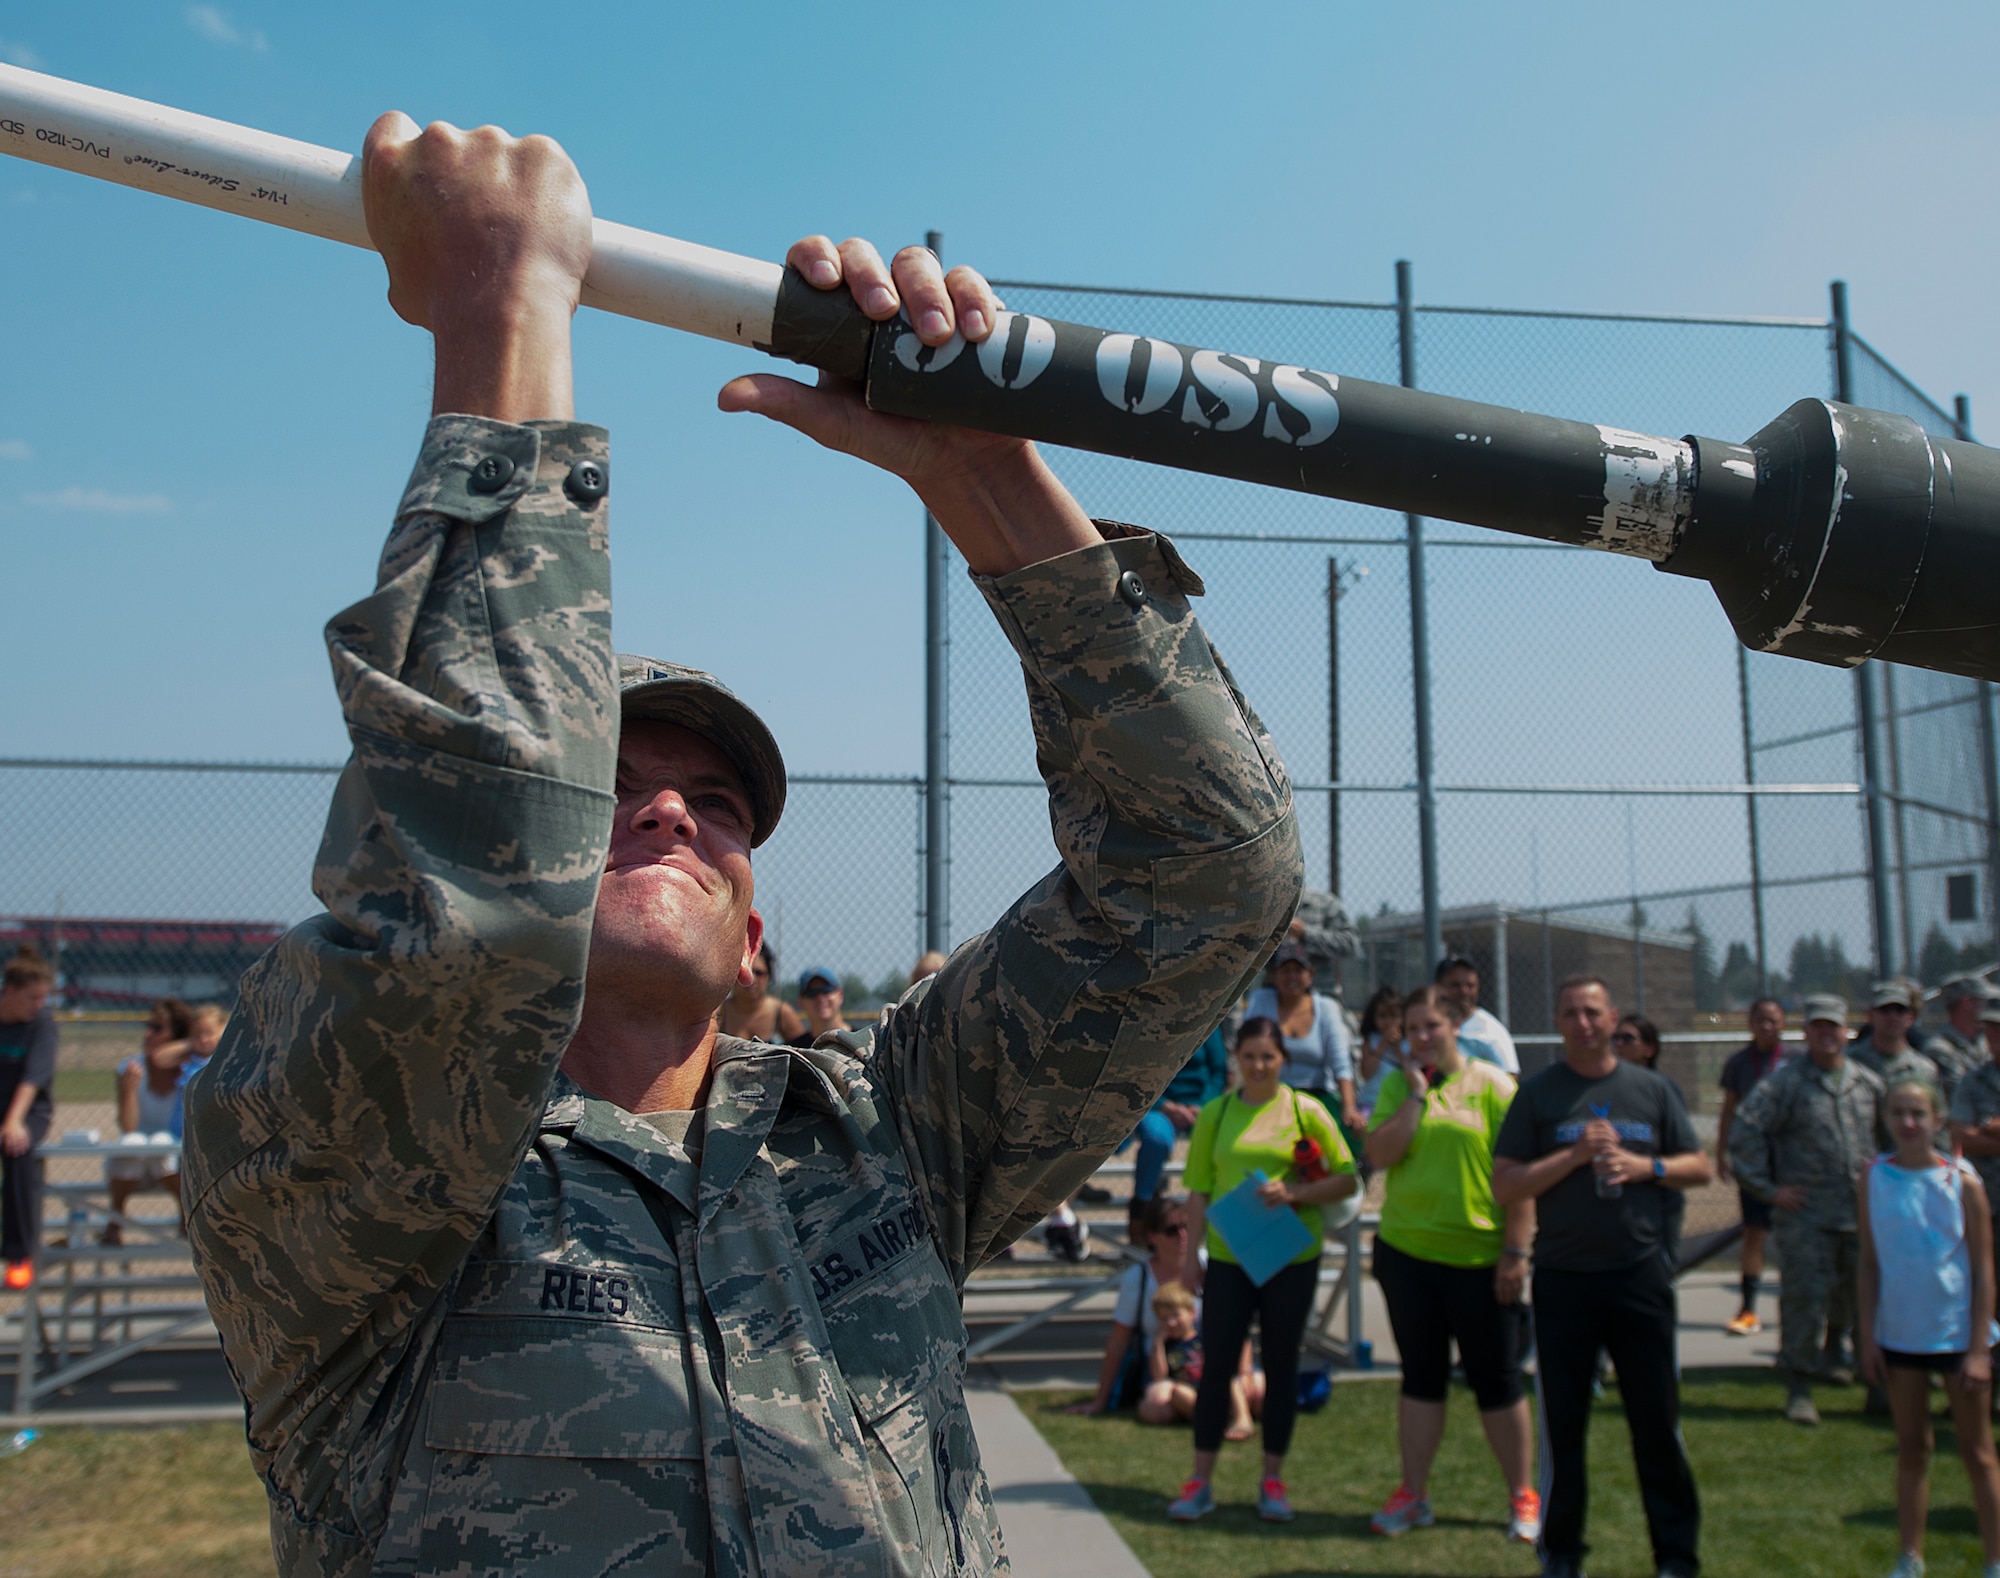 Capt. Jeff Rees, 321st Missile Squadron, loads a frozen buffalo “chip” into the muzzle of the 90th Operations Group's air gun in preparation for the buffalo chip toss competition part of the annual Frontiercade festivities on F.E. Warren Air Force Base, Wyo., Aug. 21, 2015. The buffalo chip toss brings a climatic end to the event as units use various methods to fling buffalo manure at a target more than 100 yards away. (U.S. Air Force photos by R.J. Oriez/Released)